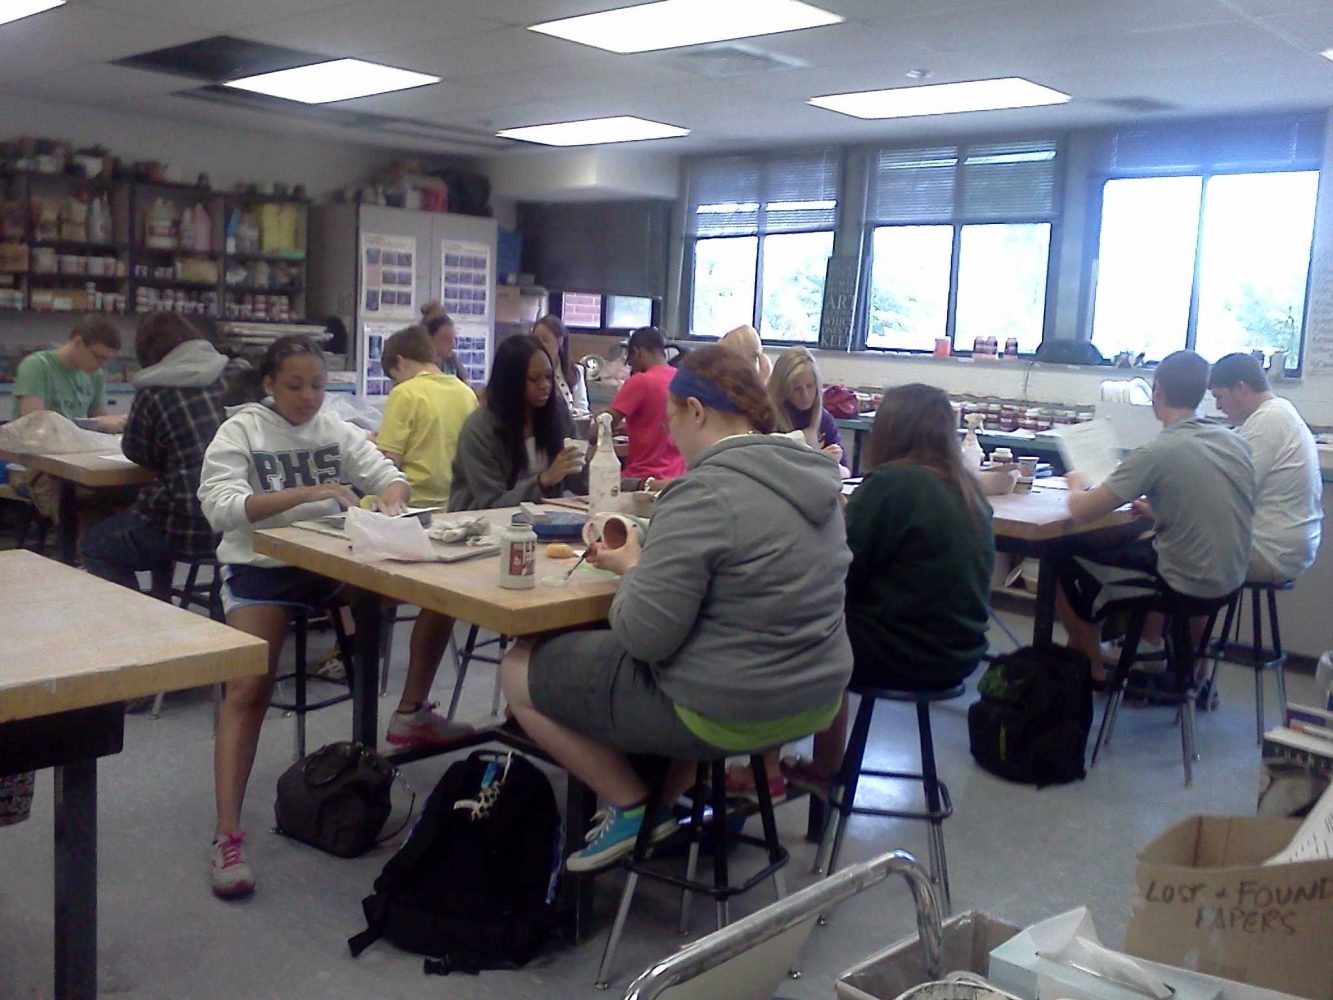 Students in Mr. Faders second hour working on their tea bowl projects.